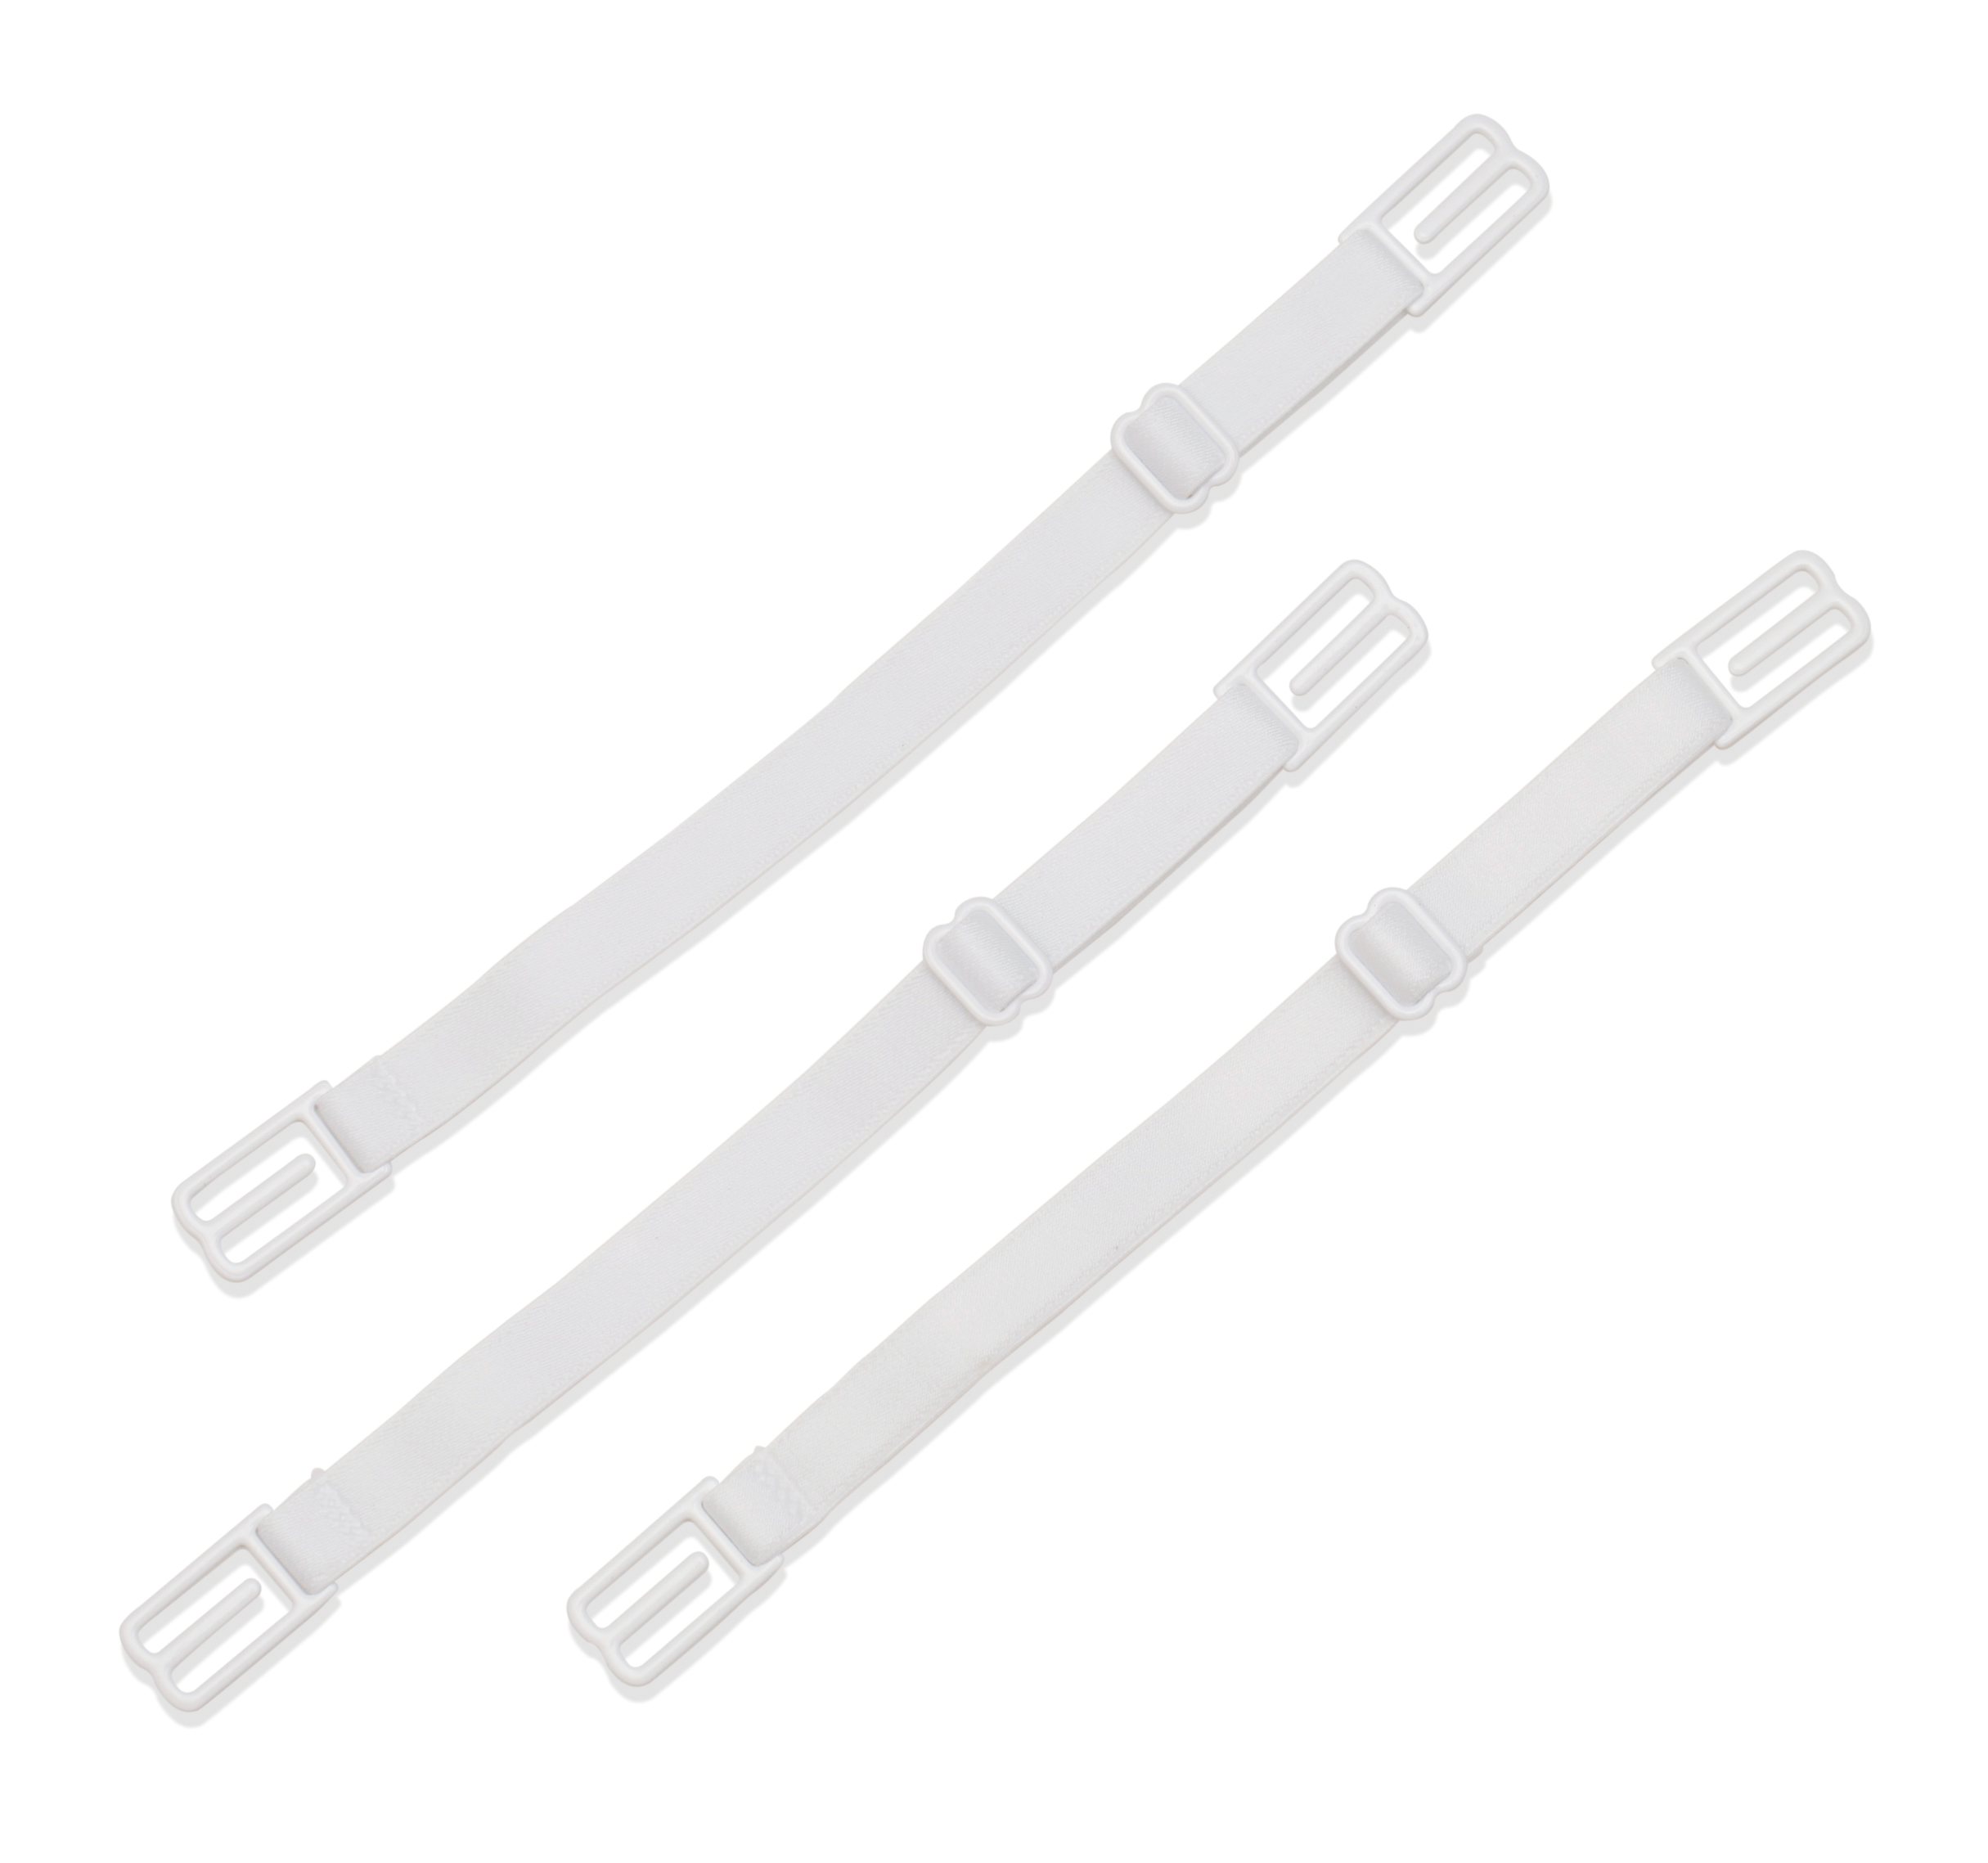 Razor Clips Bra Strap Clips Made in the USA Racer Back Conceal Straps  (White)